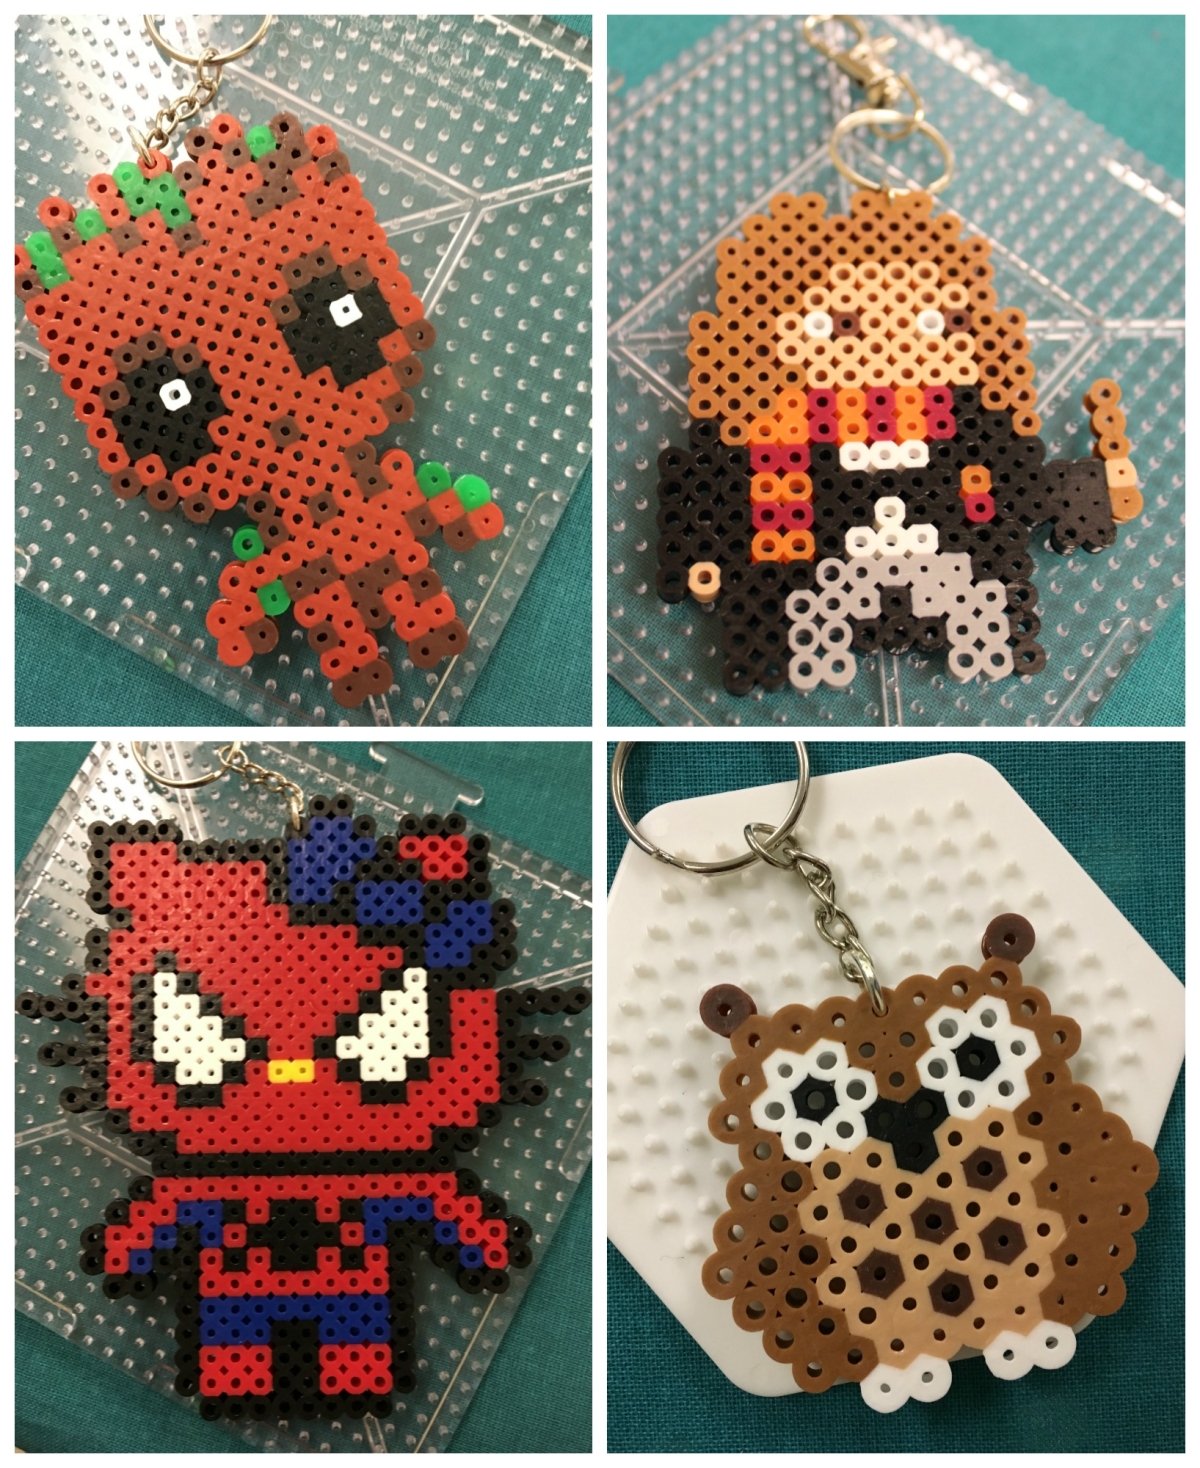 From top let: Baby Groot, Hermoine with wand, owl key chain, Spider-Man-Hello Kitty